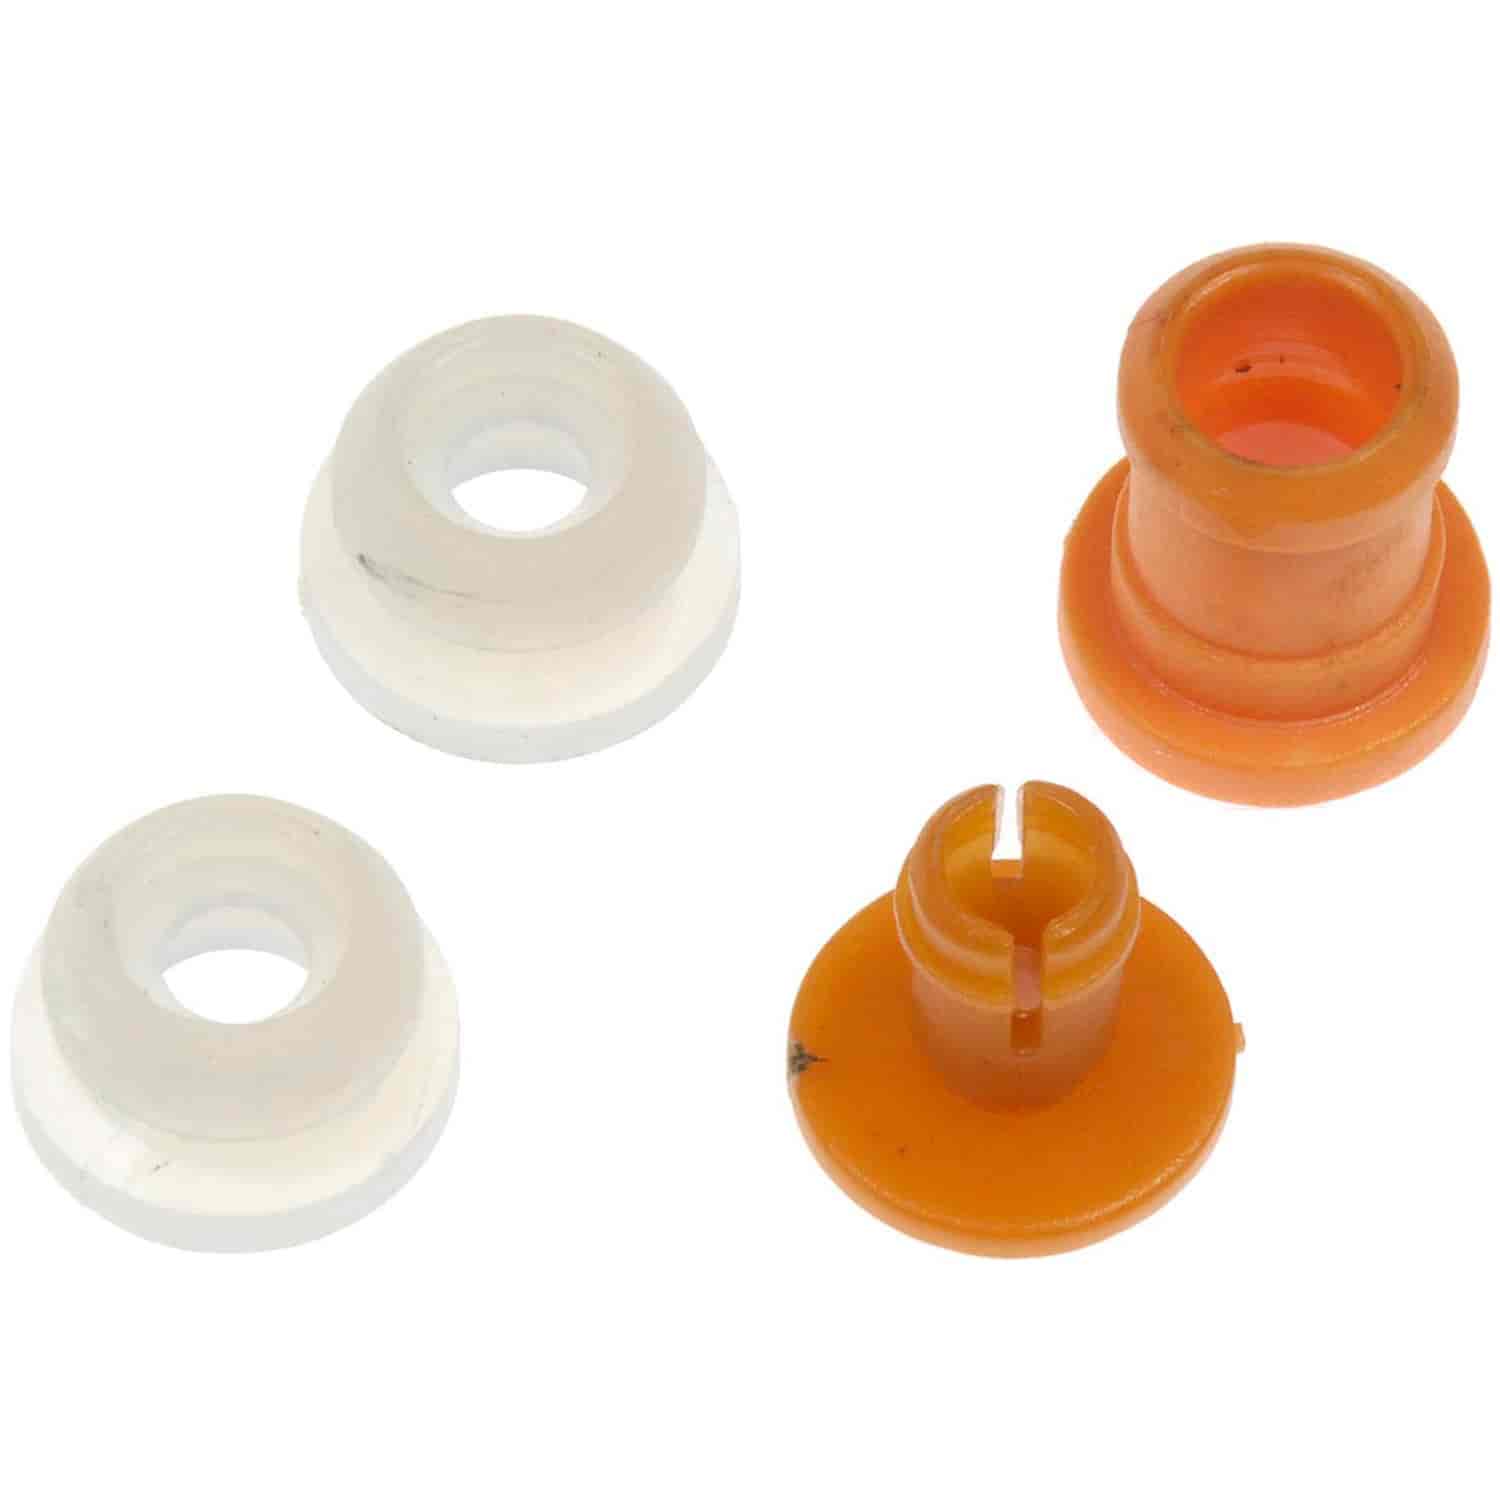 Transmission Shift Cable Replacement Bushings 1995-2009 GM, 2005-2009 Saab, 2005-2010 Ford